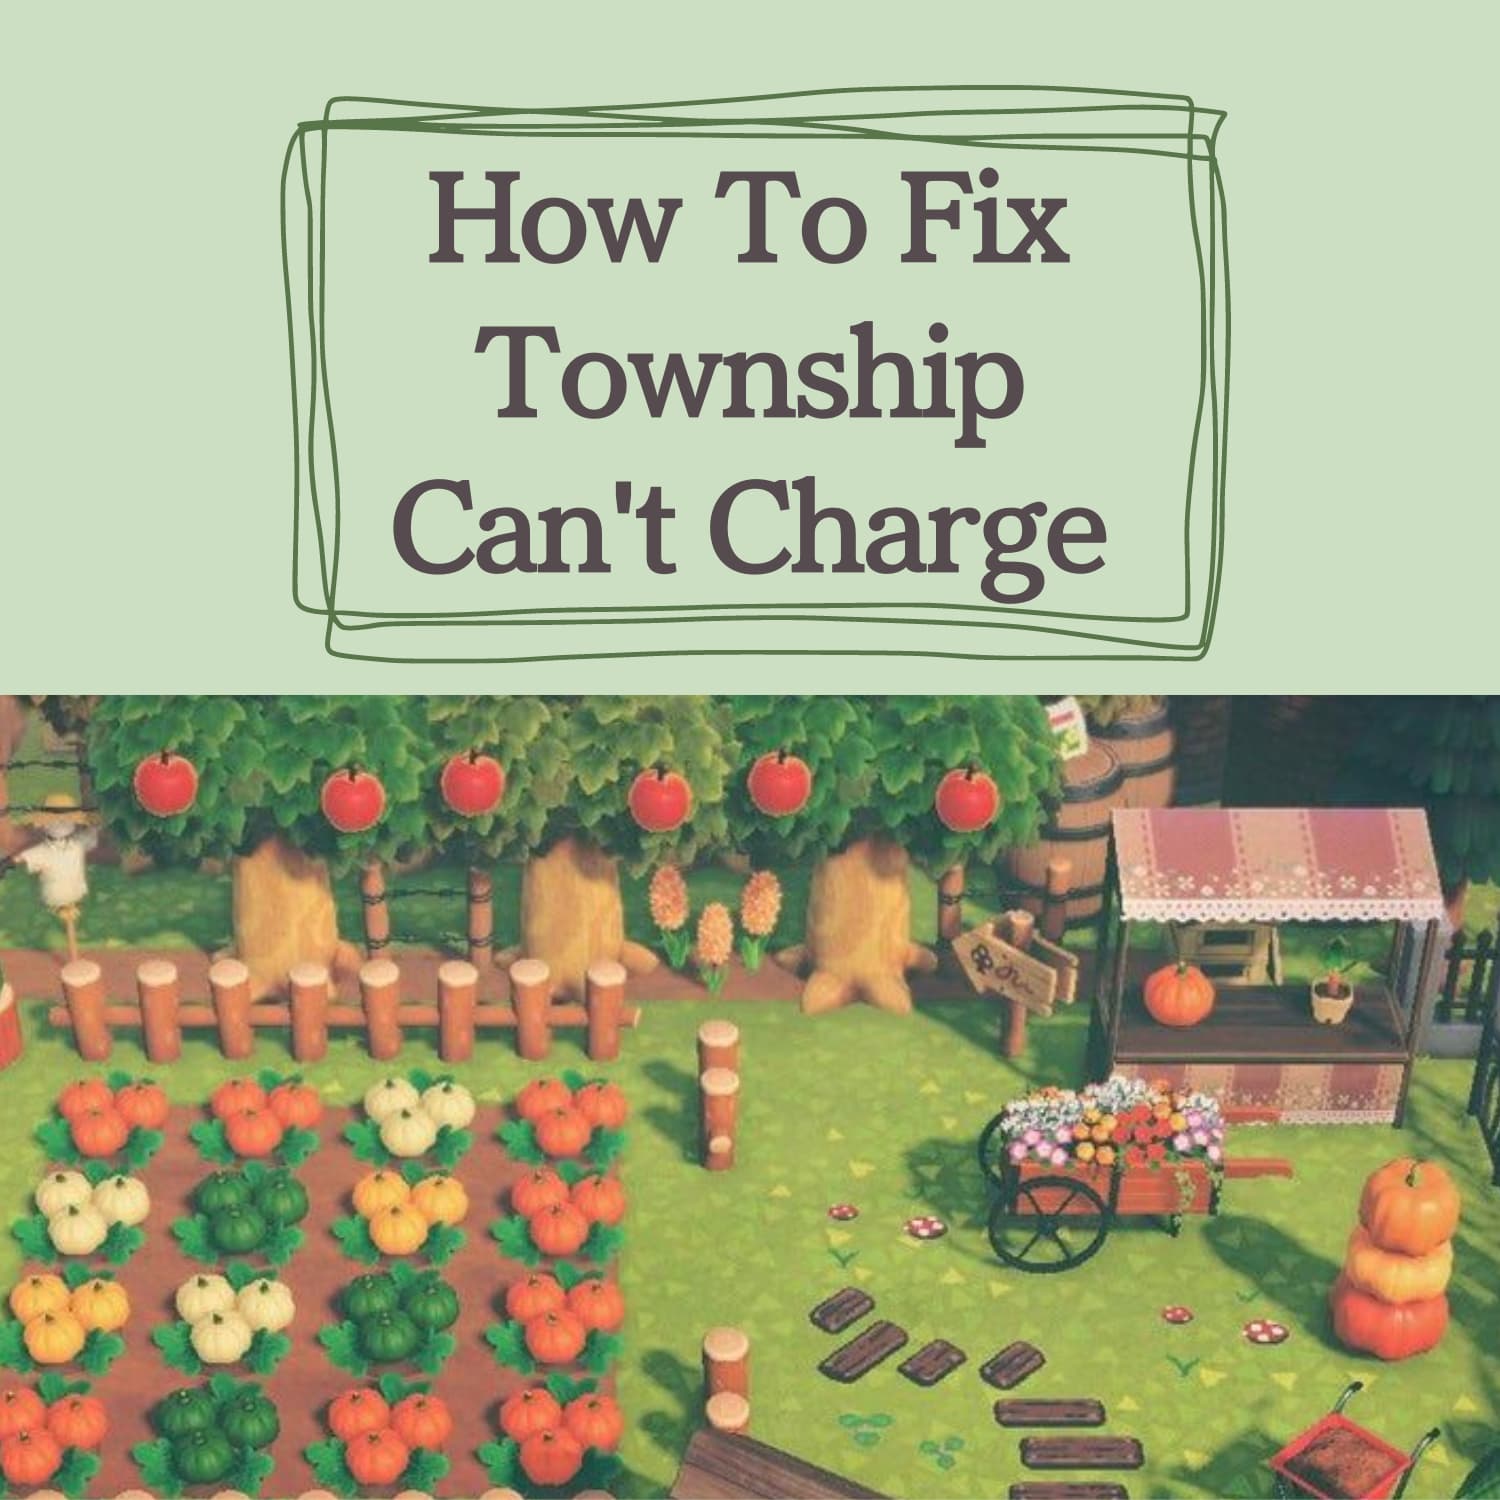 How To Fix Township(Township) Can't Charge #Township